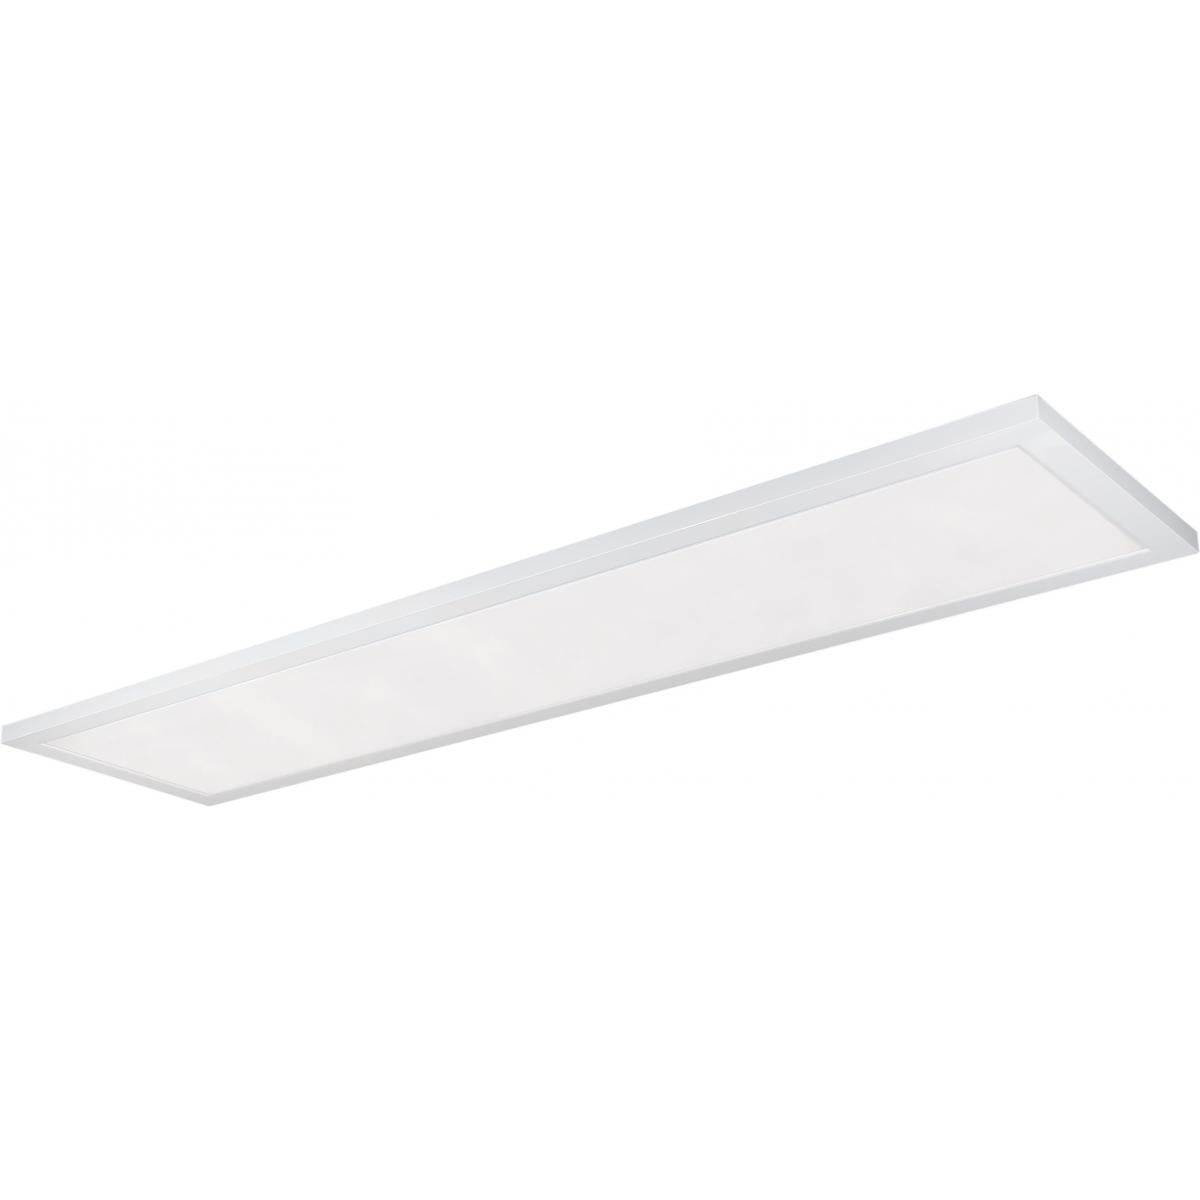 Satco 62-1254 45W 12 in. x 48 in. Surface Mount LED Fixture 4000K 90 CRI Low Profile White Finish 120/277V